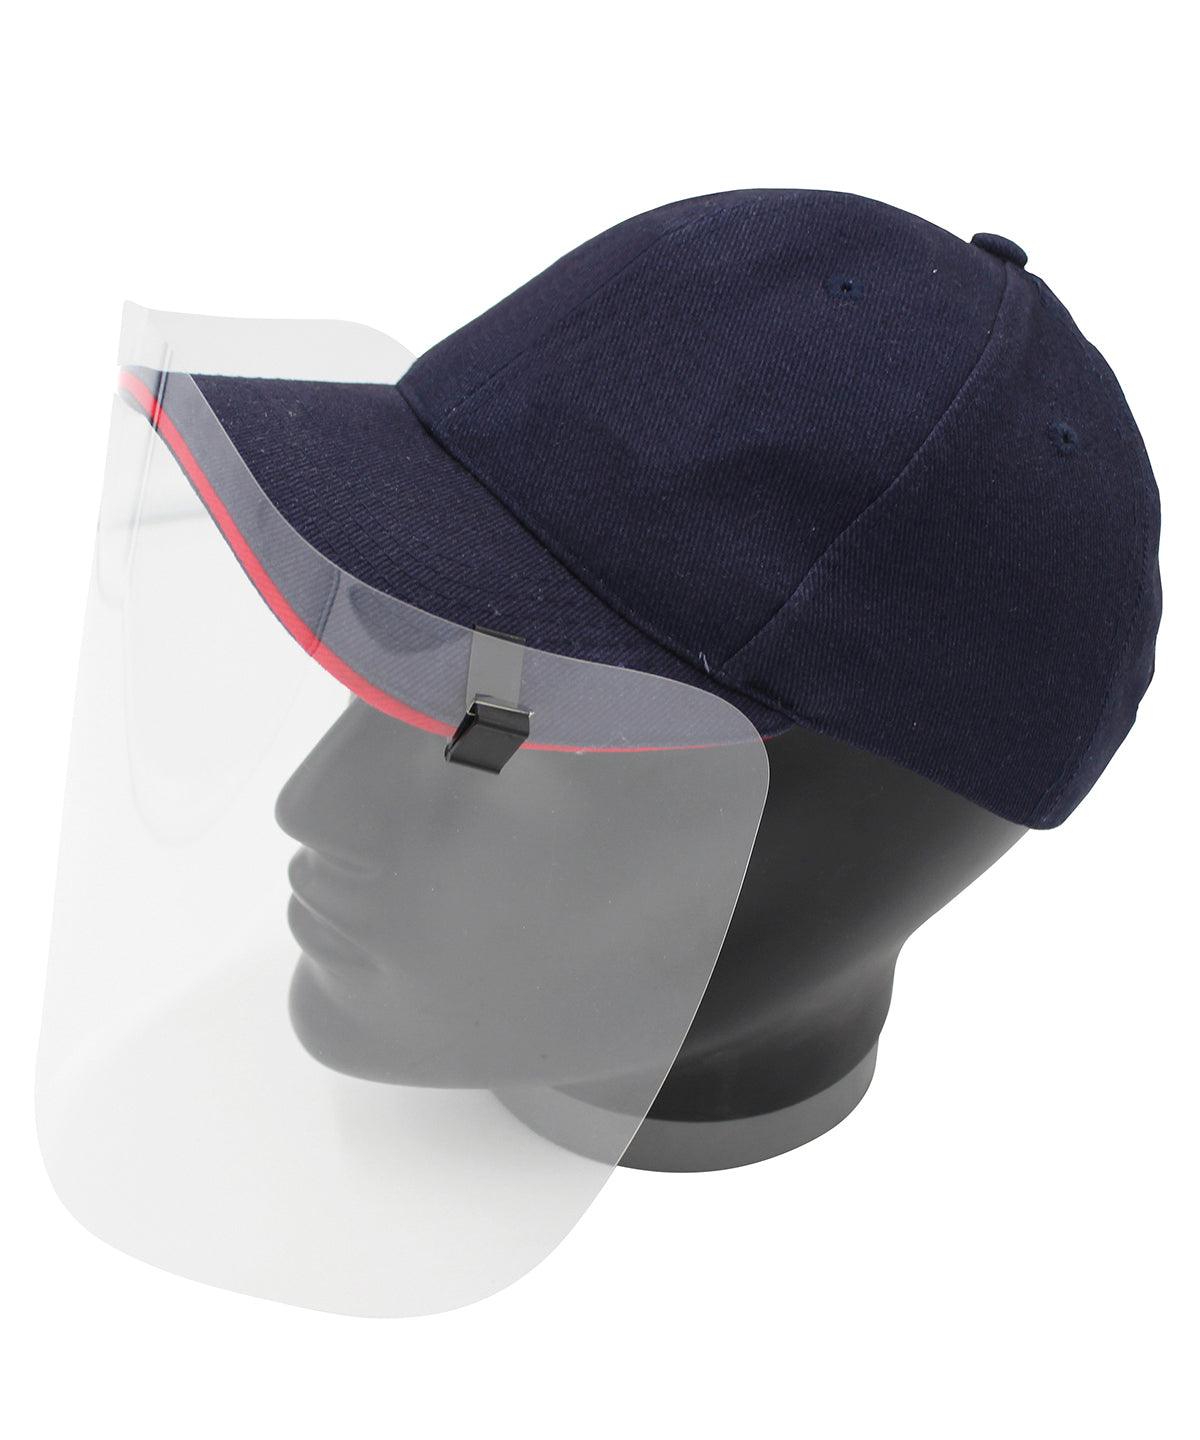 Clear - Shakoshield cap visor (pack of 10) Cap Visors AXQ Personal Protection Schoolwear Centres